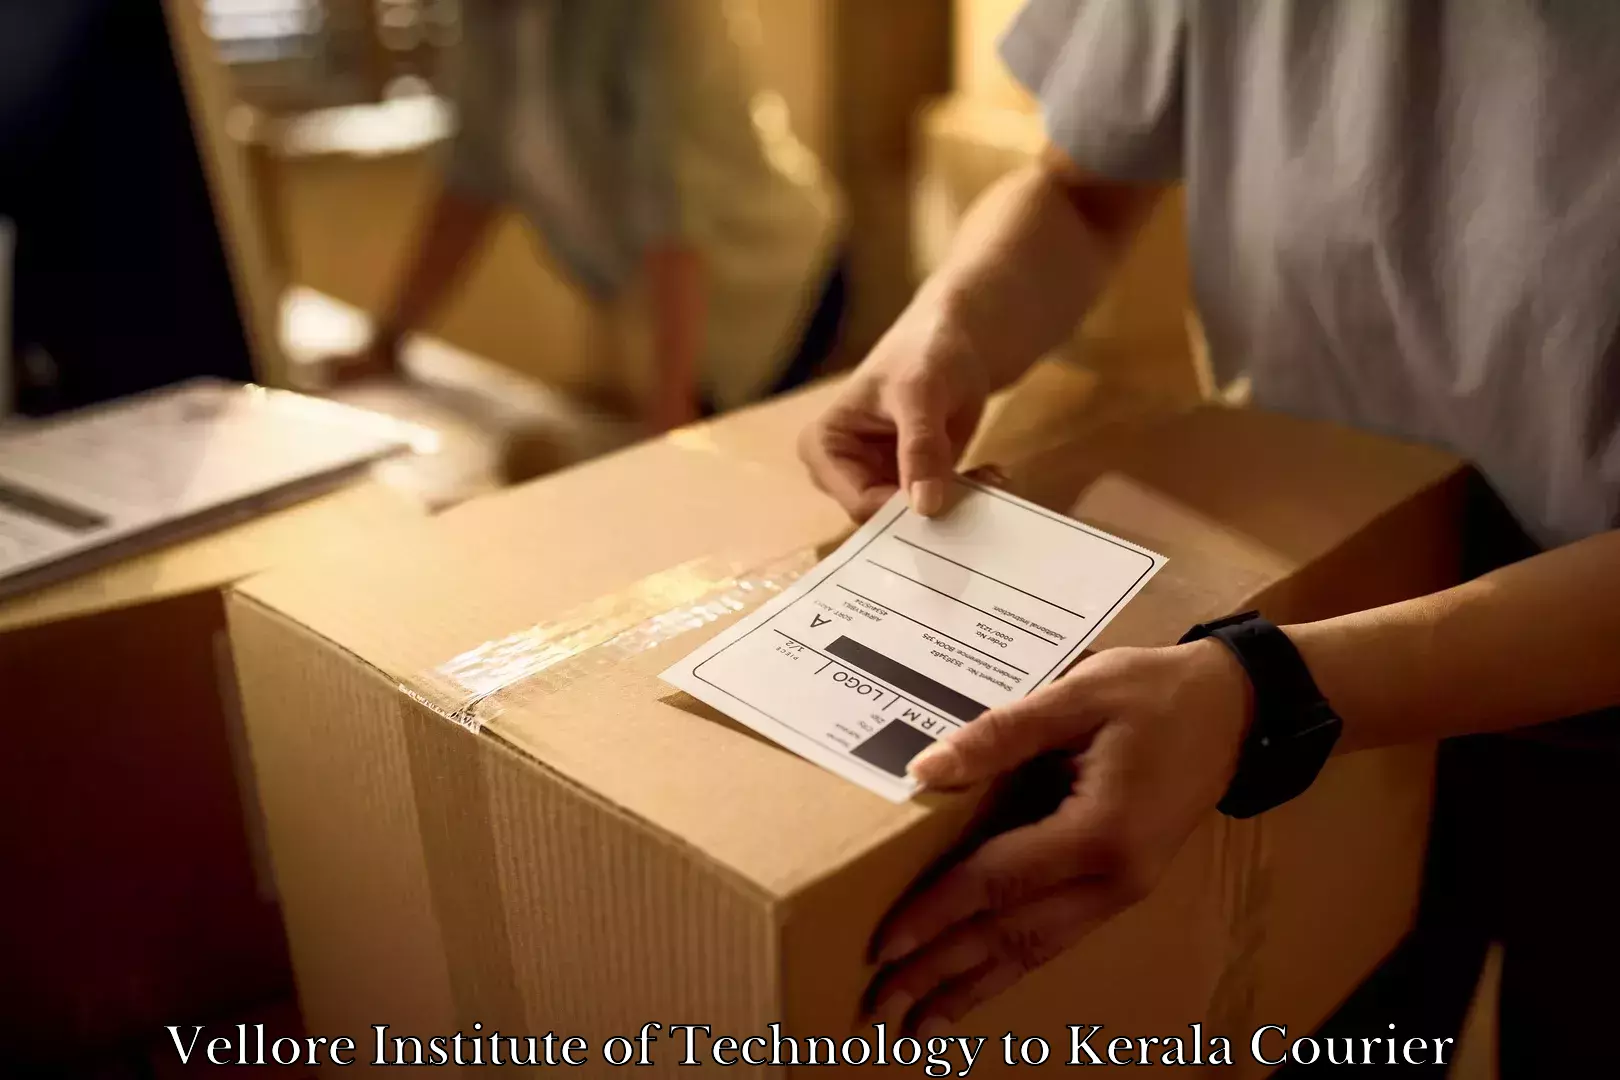 Furniture transport solutions Vellore Institute of Technology to Kerala